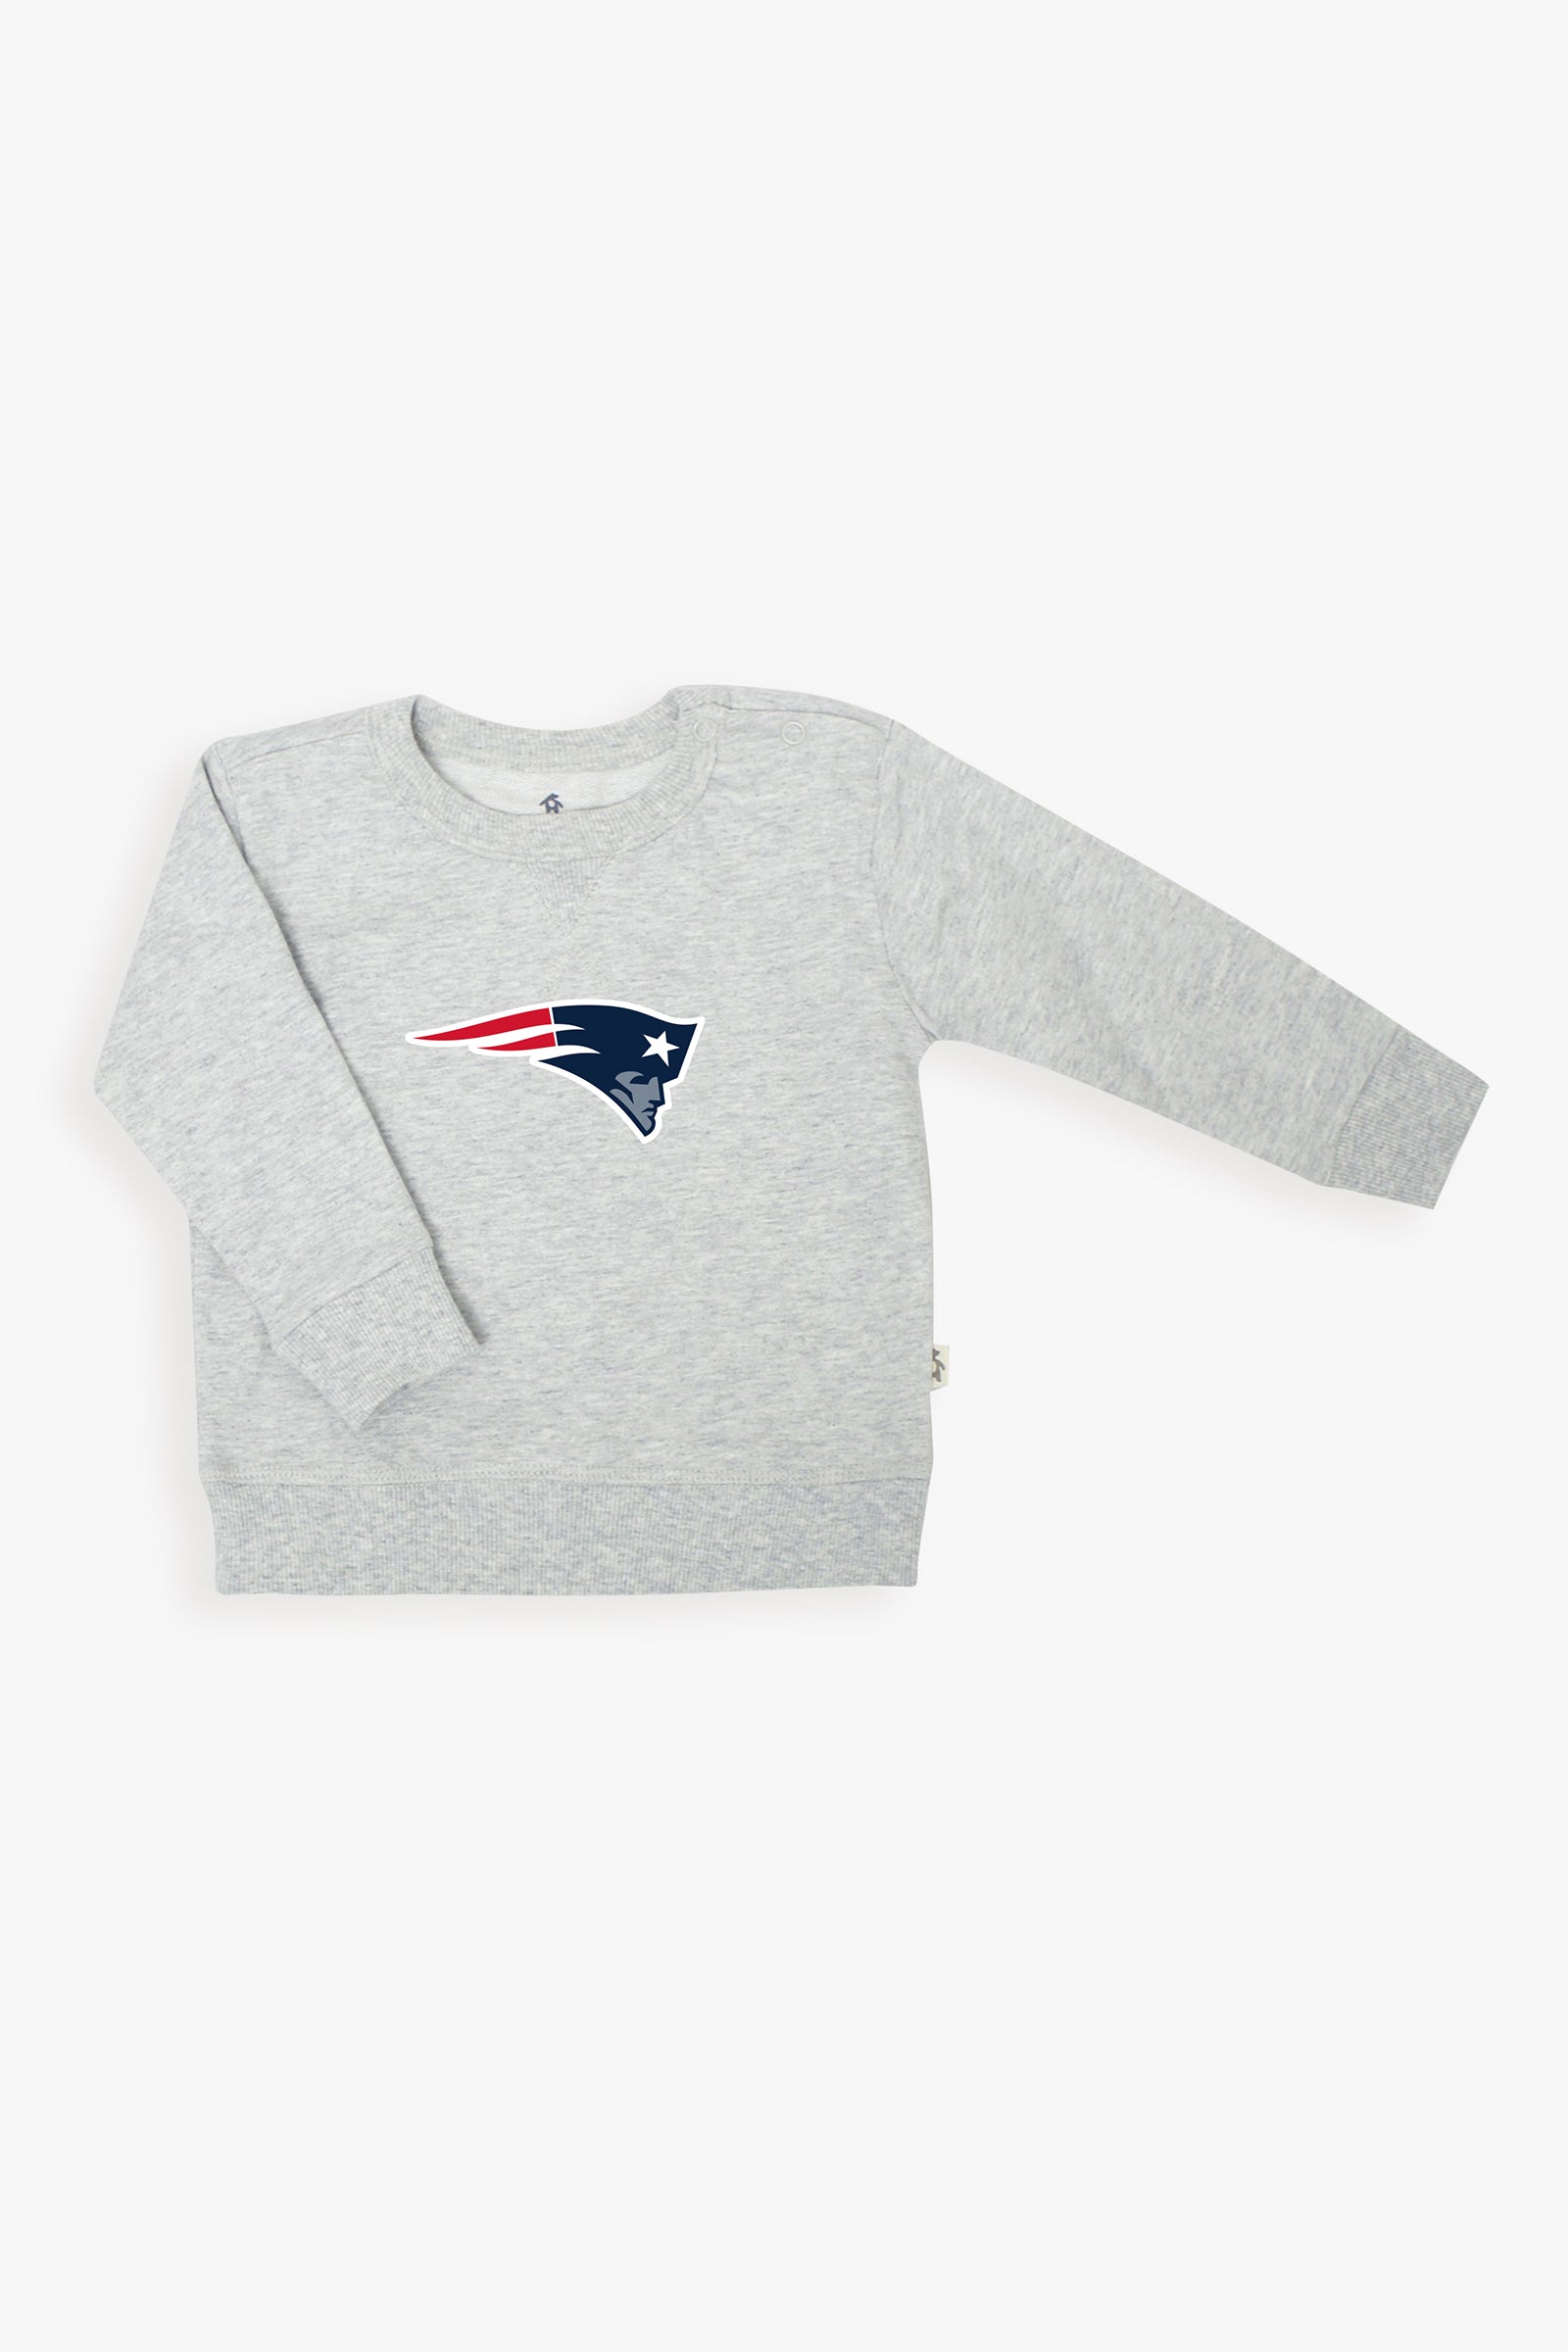 NFL Baby French Terry Crewneck Sweater in Grey